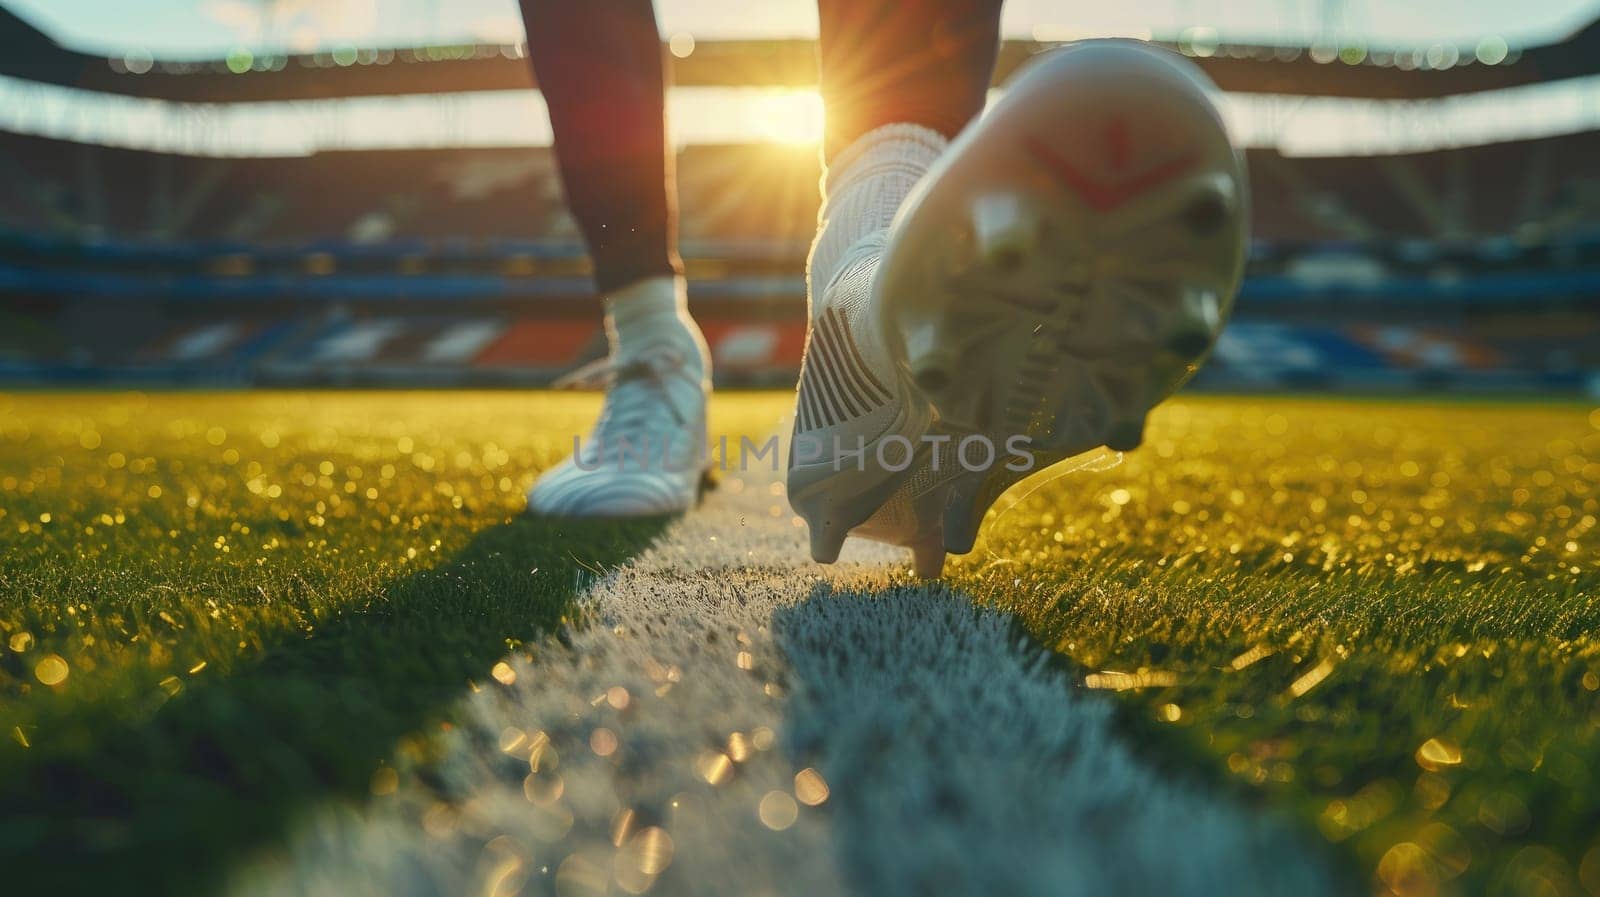 A athlete's feet in soccer shoes in the stadium, Soccer player feet standing on the green grass at stadium by nijieimu